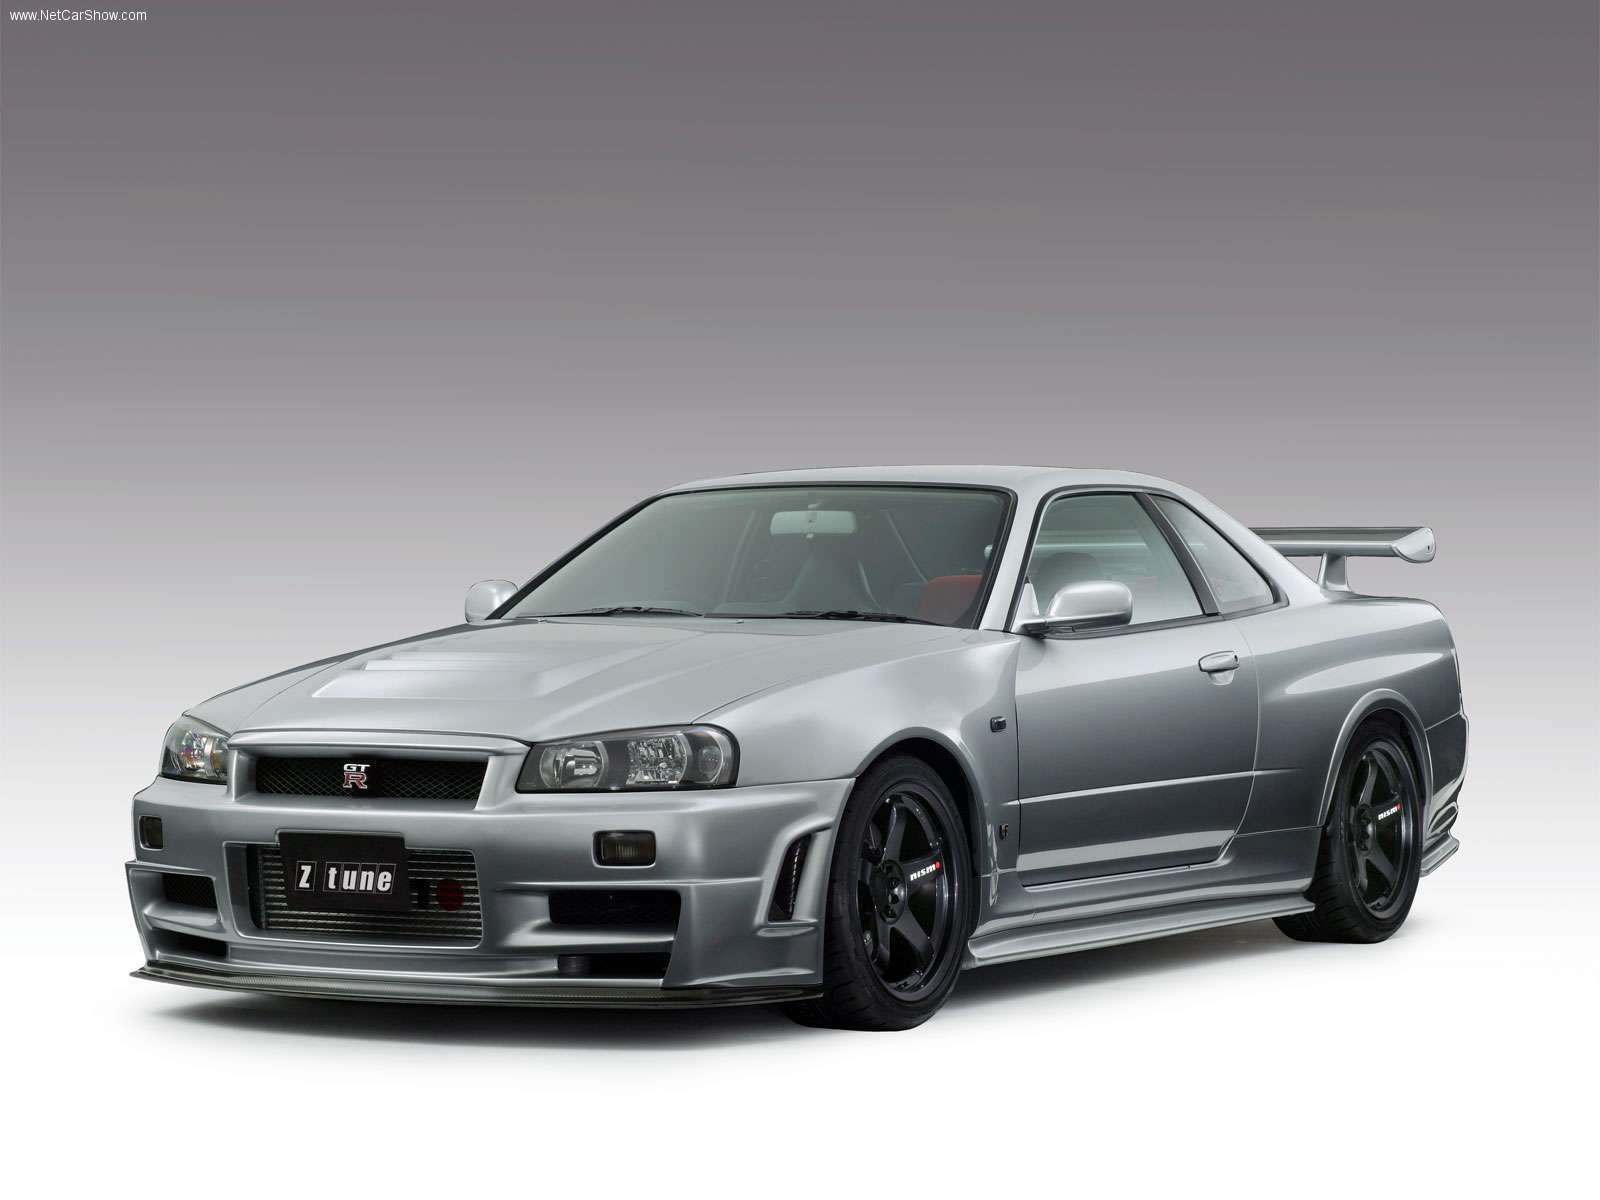 pic new posts: Wallpapers Nissan Skyline R34 Gtr